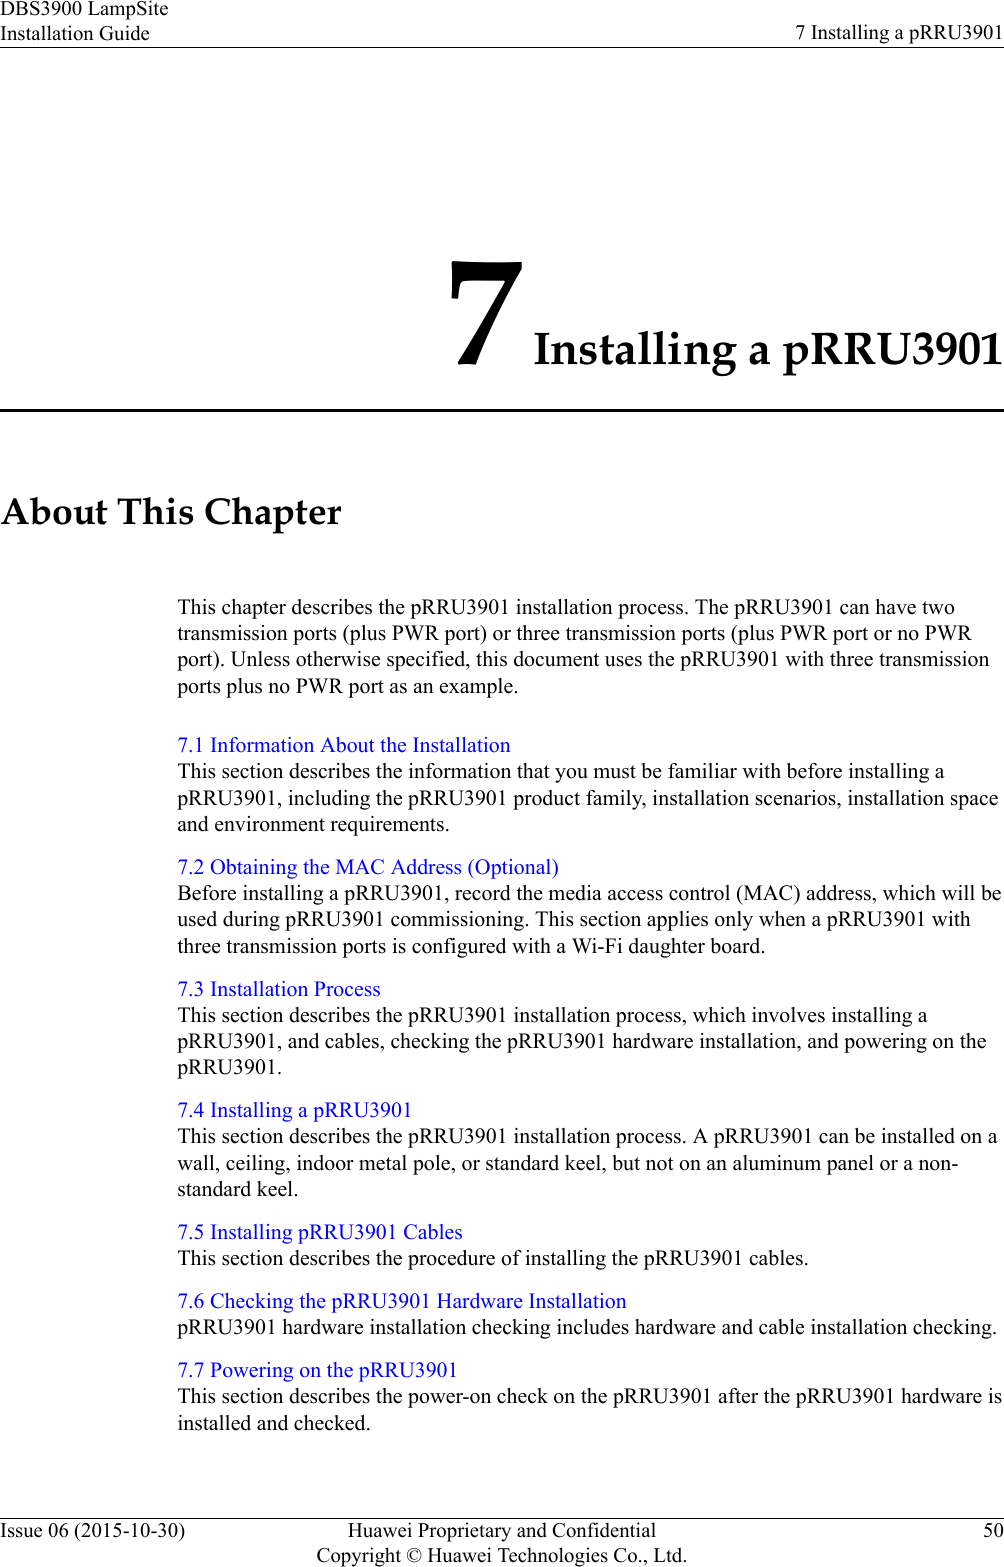 7 Installing a pRRU3901About This ChapterThis chapter describes the pRRU3901 installation process. The pRRU3901 can have twotransmission ports (plus PWR port) or three transmission ports (plus PWR port or no PWRport). Unless otherwise specified, this document uses the pRRU3901 with three transmissionports plus no PWR port as an example.7.1 Information About the InstallationThis section describes the information that you must be familiar with before installing apRRU3901, including the pRRU3901 product family, installation scenarios, installation spaceand environment requirements.7.2 Obtaining the MAC Address (Optional)Before installing a pRRU3901, record the media access control (MAC) address, which will beused during pRRU3901 commissioning. This section applies only when a pRRU3901 withthree transmission ports is configured with a Wi-Fi daughter board.7.3 Installation ProcessThis section describes the pRRU3901 installation process, which involves installing apRRU3901, and cables, checking the pRRU3901 hardware installation, and powering on thepRRU3901.7.4 Installing a pRRU3901This section describes the pRRU3901 installation process. A pRRU3901 can be installed on awall, ceiling, indoor metal pole, or standard keel, but not on an aluminum panel or a non-standard keel.7.5 Installing pRRU3901 CablesThis section describes the procedure of installing the pRRU3901 cables.7.6 Checking the pRRU3901 Hardware InstallationpRRU3901 hardware installation checking includes hardware and cable installation checking.7.7 Powering on the pRRU3901This section describes the power-on check on the pRRU3901 after the pRRU3901 hardware isinstalled and checked.DBS3900 LampSiteInstallation Guide 7 Installing a pRRU3901Issue 06 (2015-10-30) Huawei Proprietary and ConfidentialCopyright © Huawei Technologies Co., Ltd.50